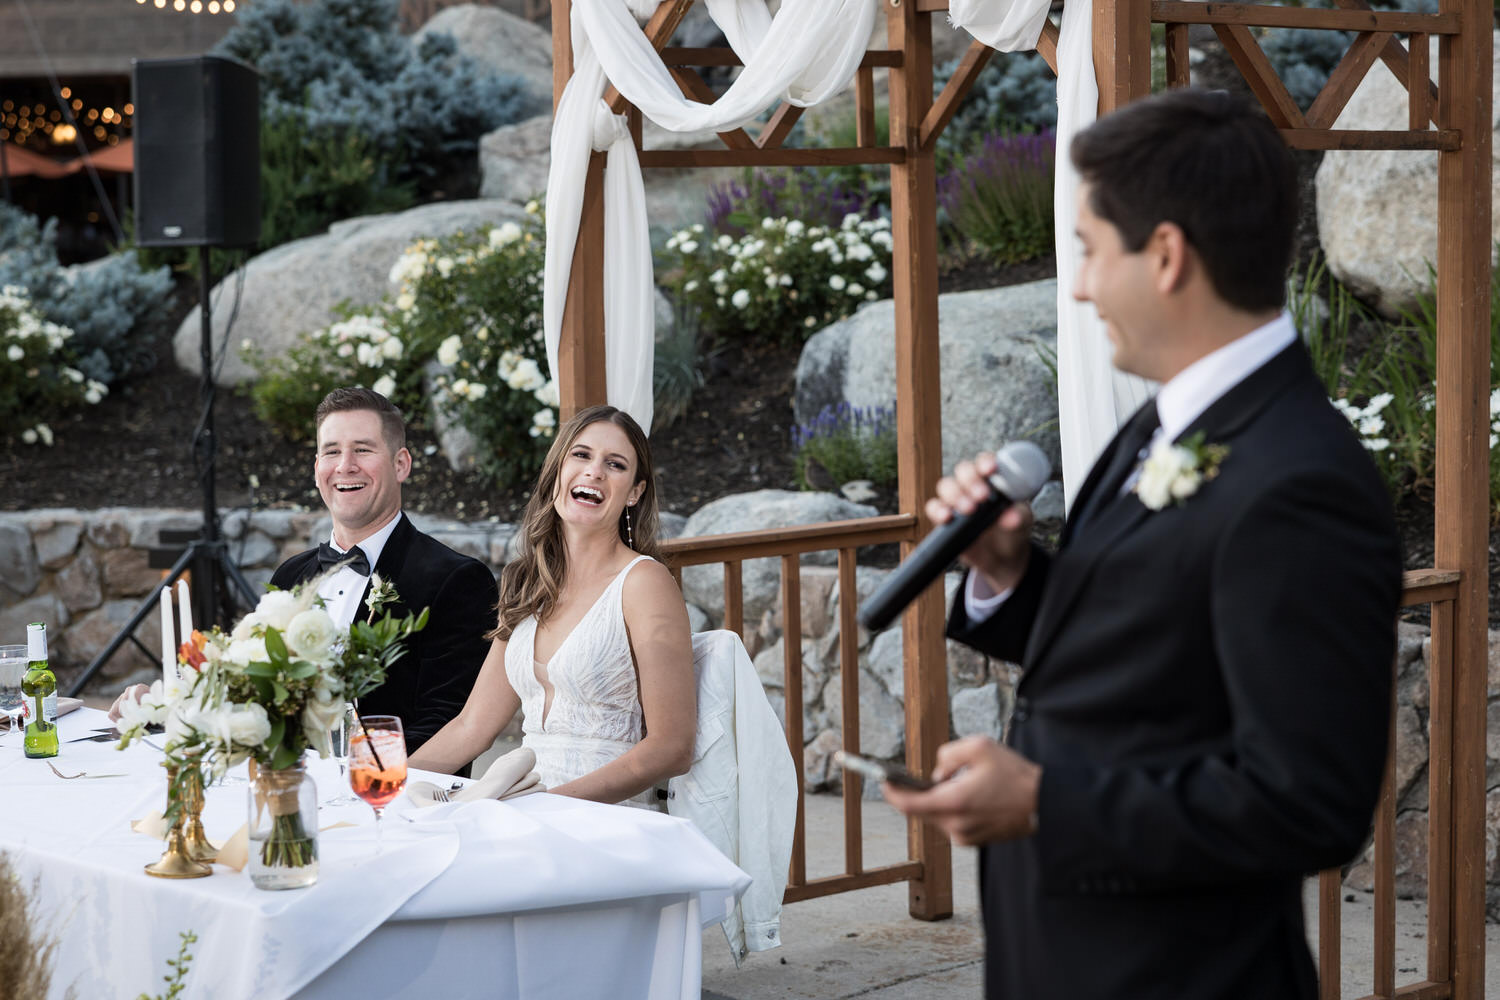 The best man presents an entertaining speech to the bride and groom.